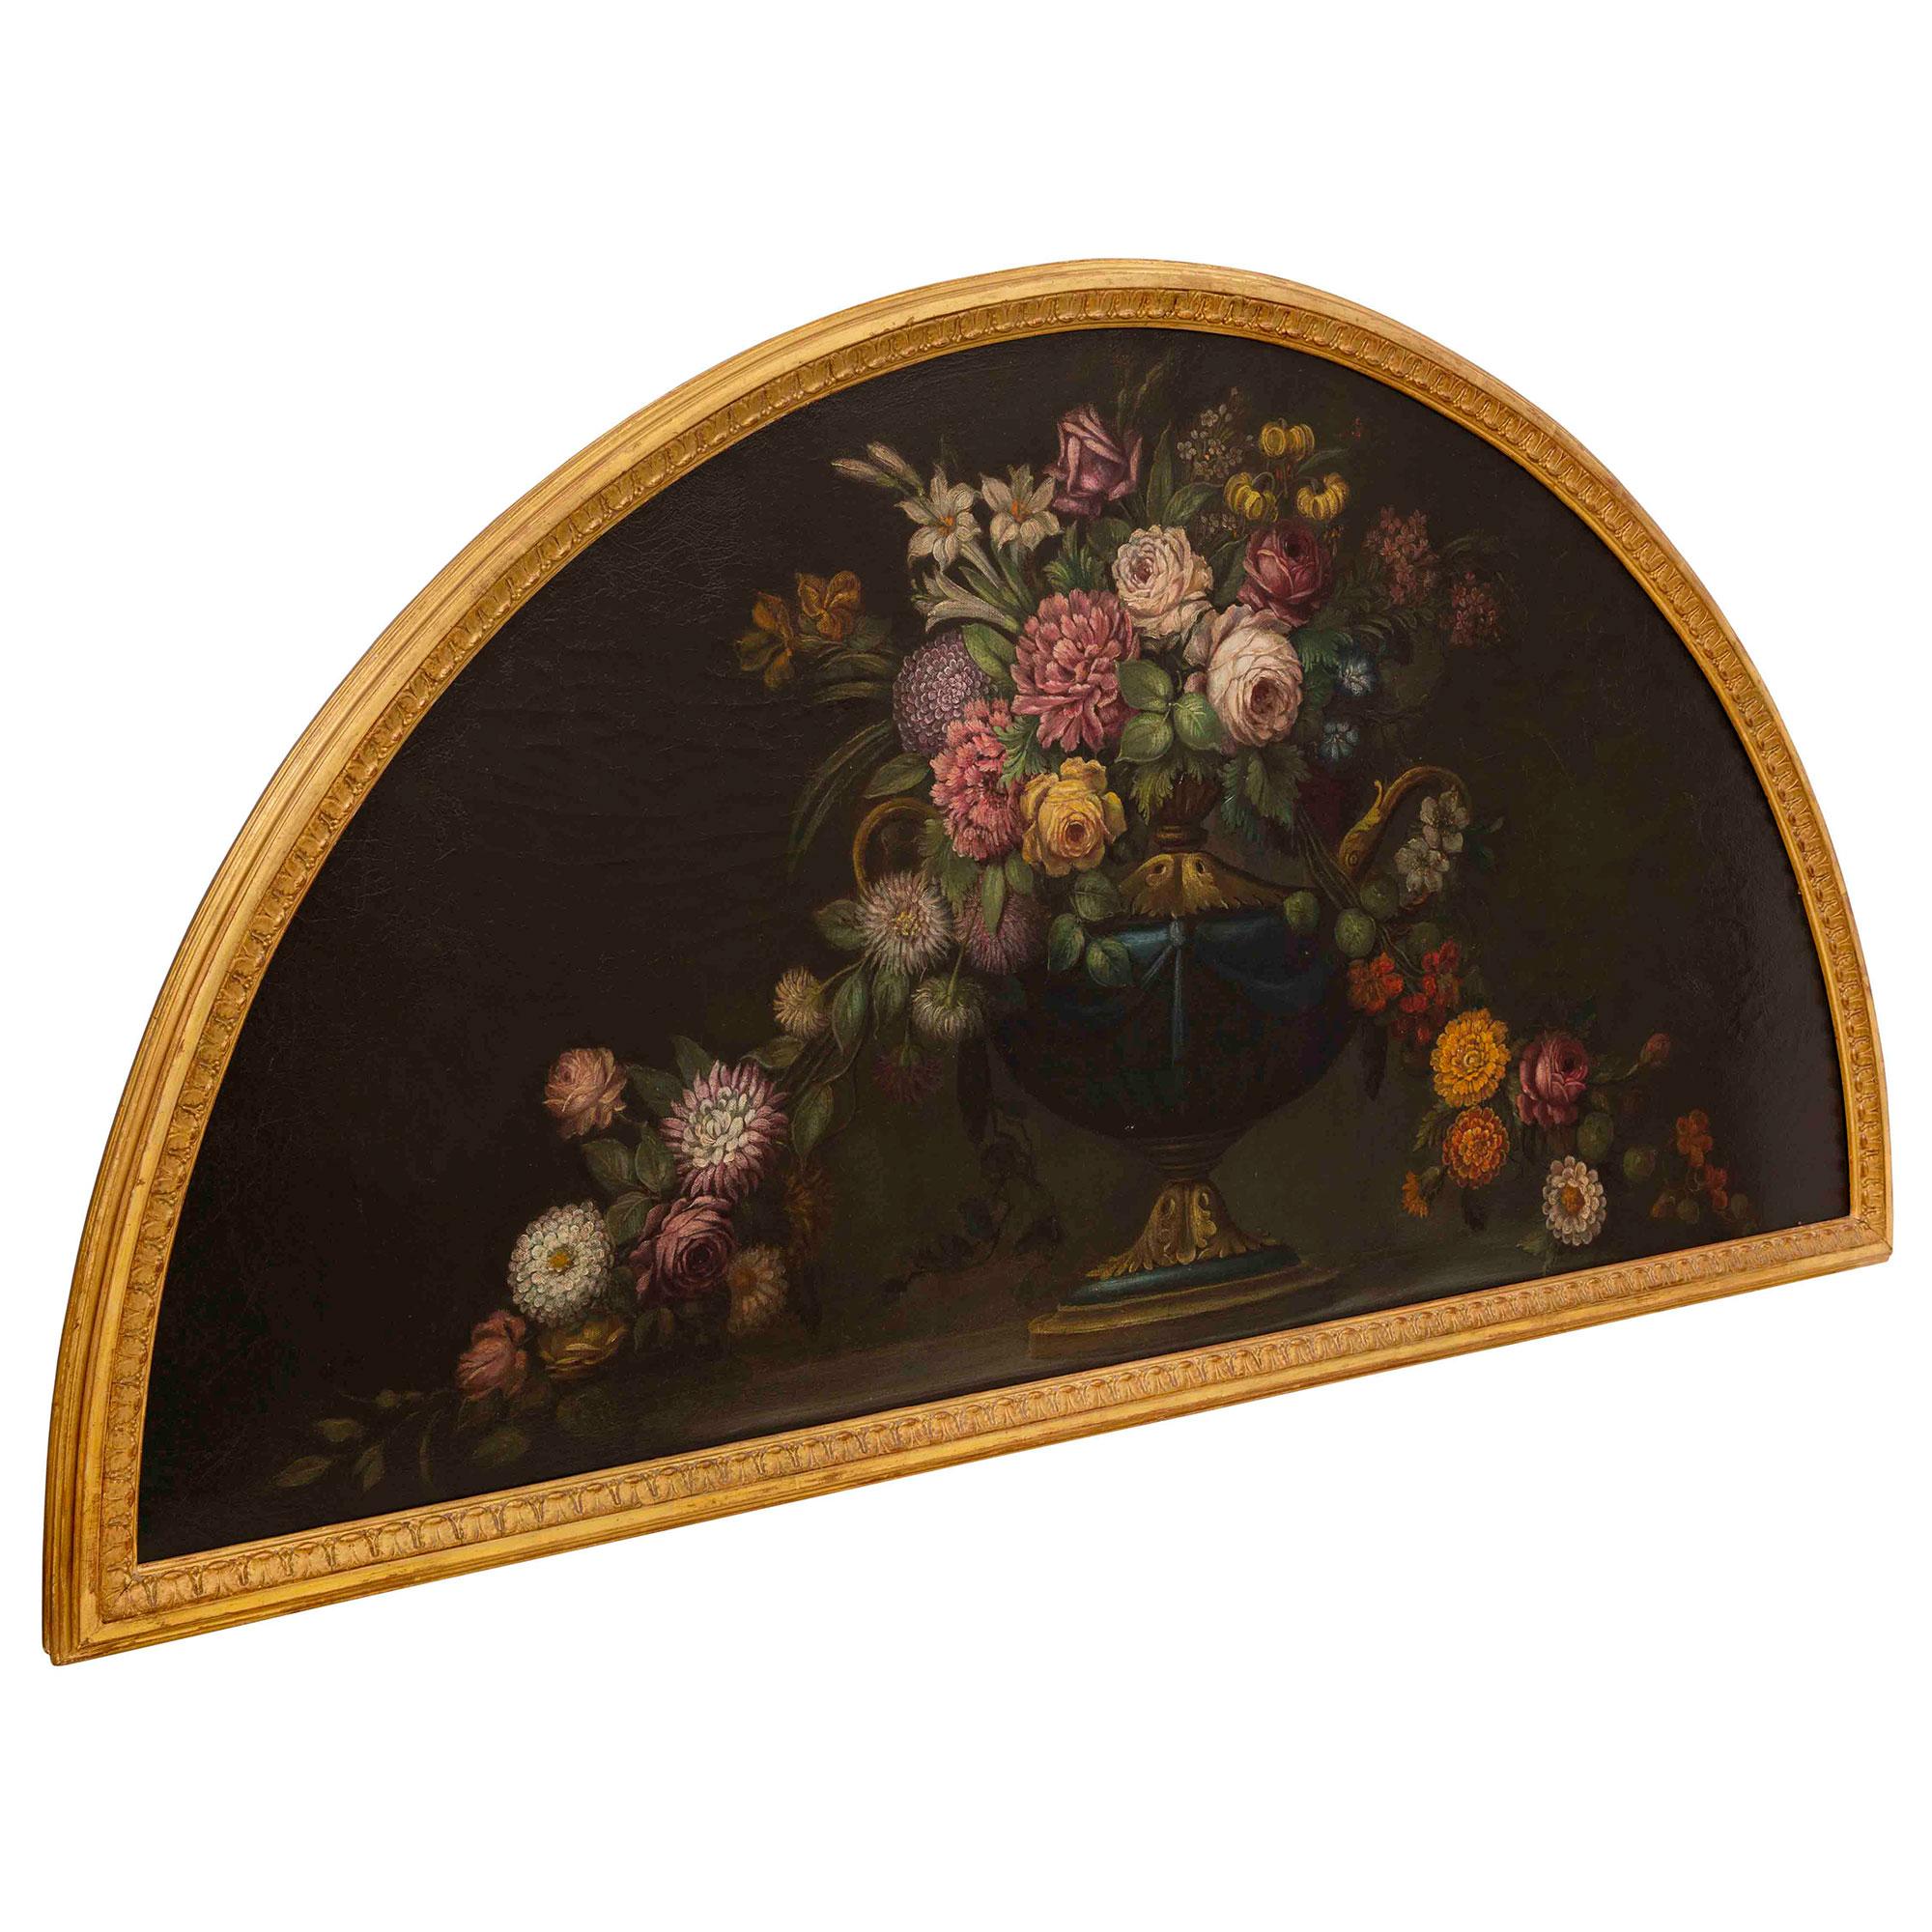 A stunning French 19th century Louis XVI st. still life painting. The painting is set within its original giltwood frame with an elegant mottled border and finely carved foliate design. The painting displays warm and beautiful rich vivid colors, a